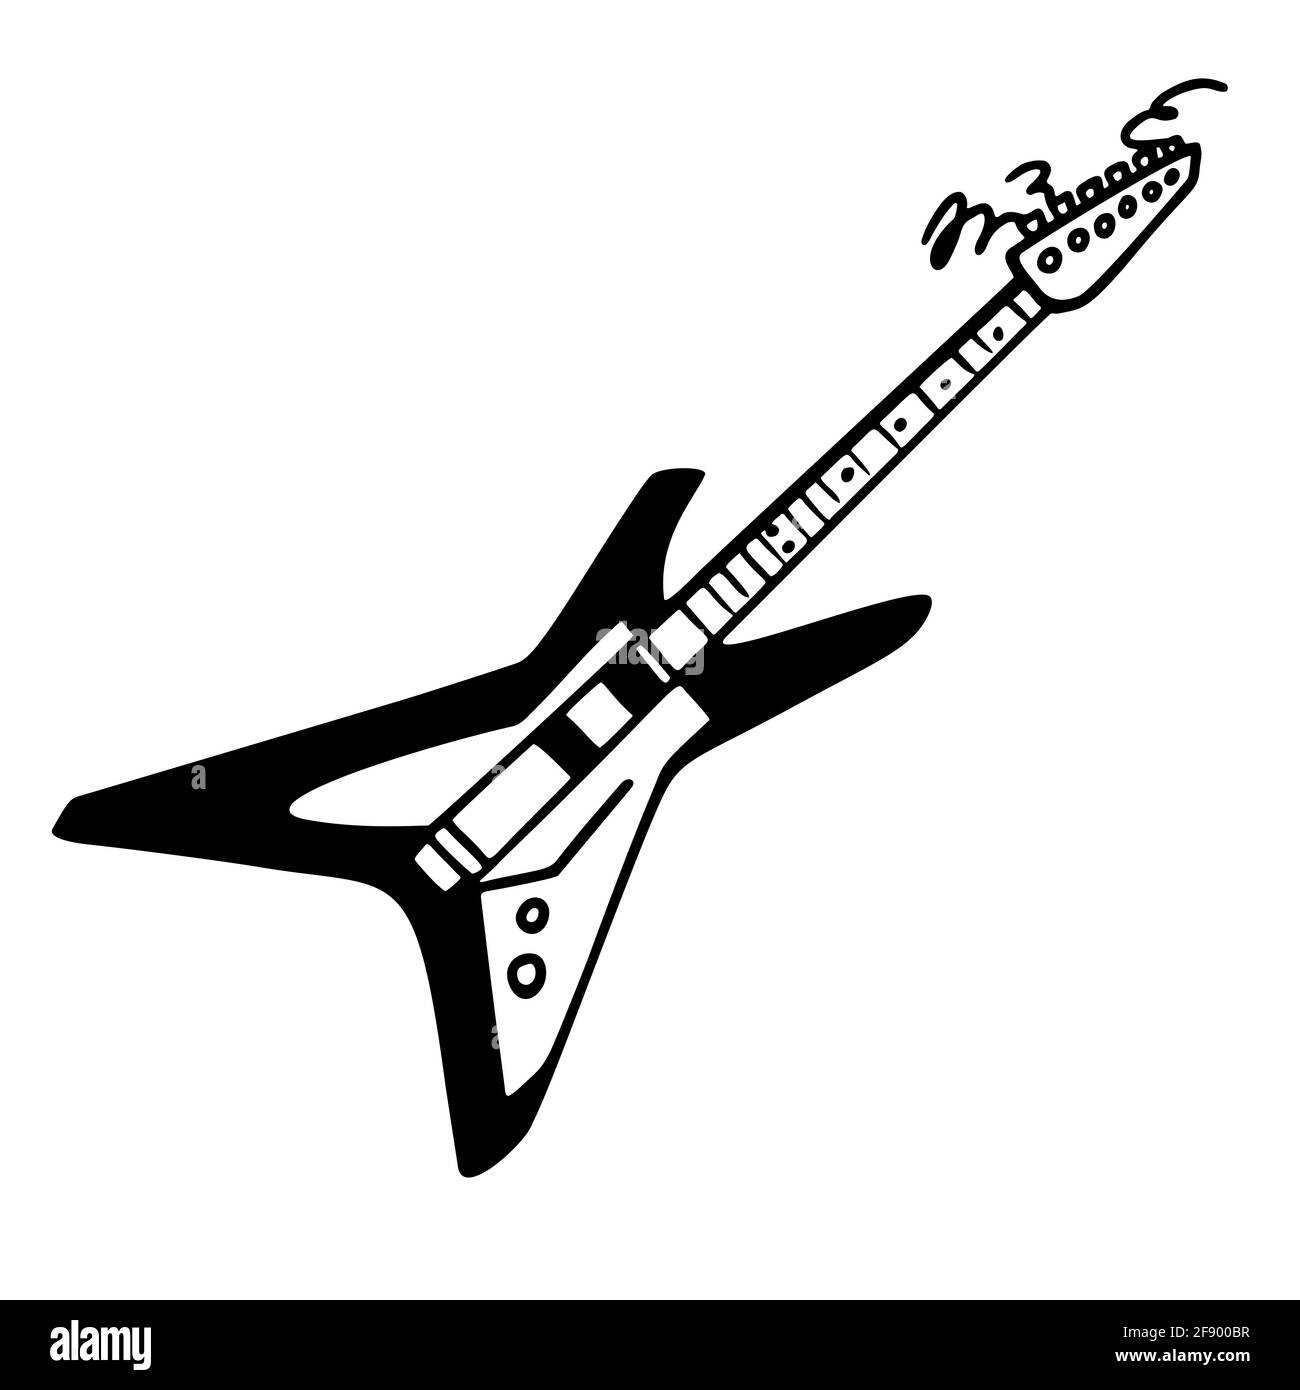 Guitar tattoo Cut Out Stock Images & Pictures - Page 2 - Alamy